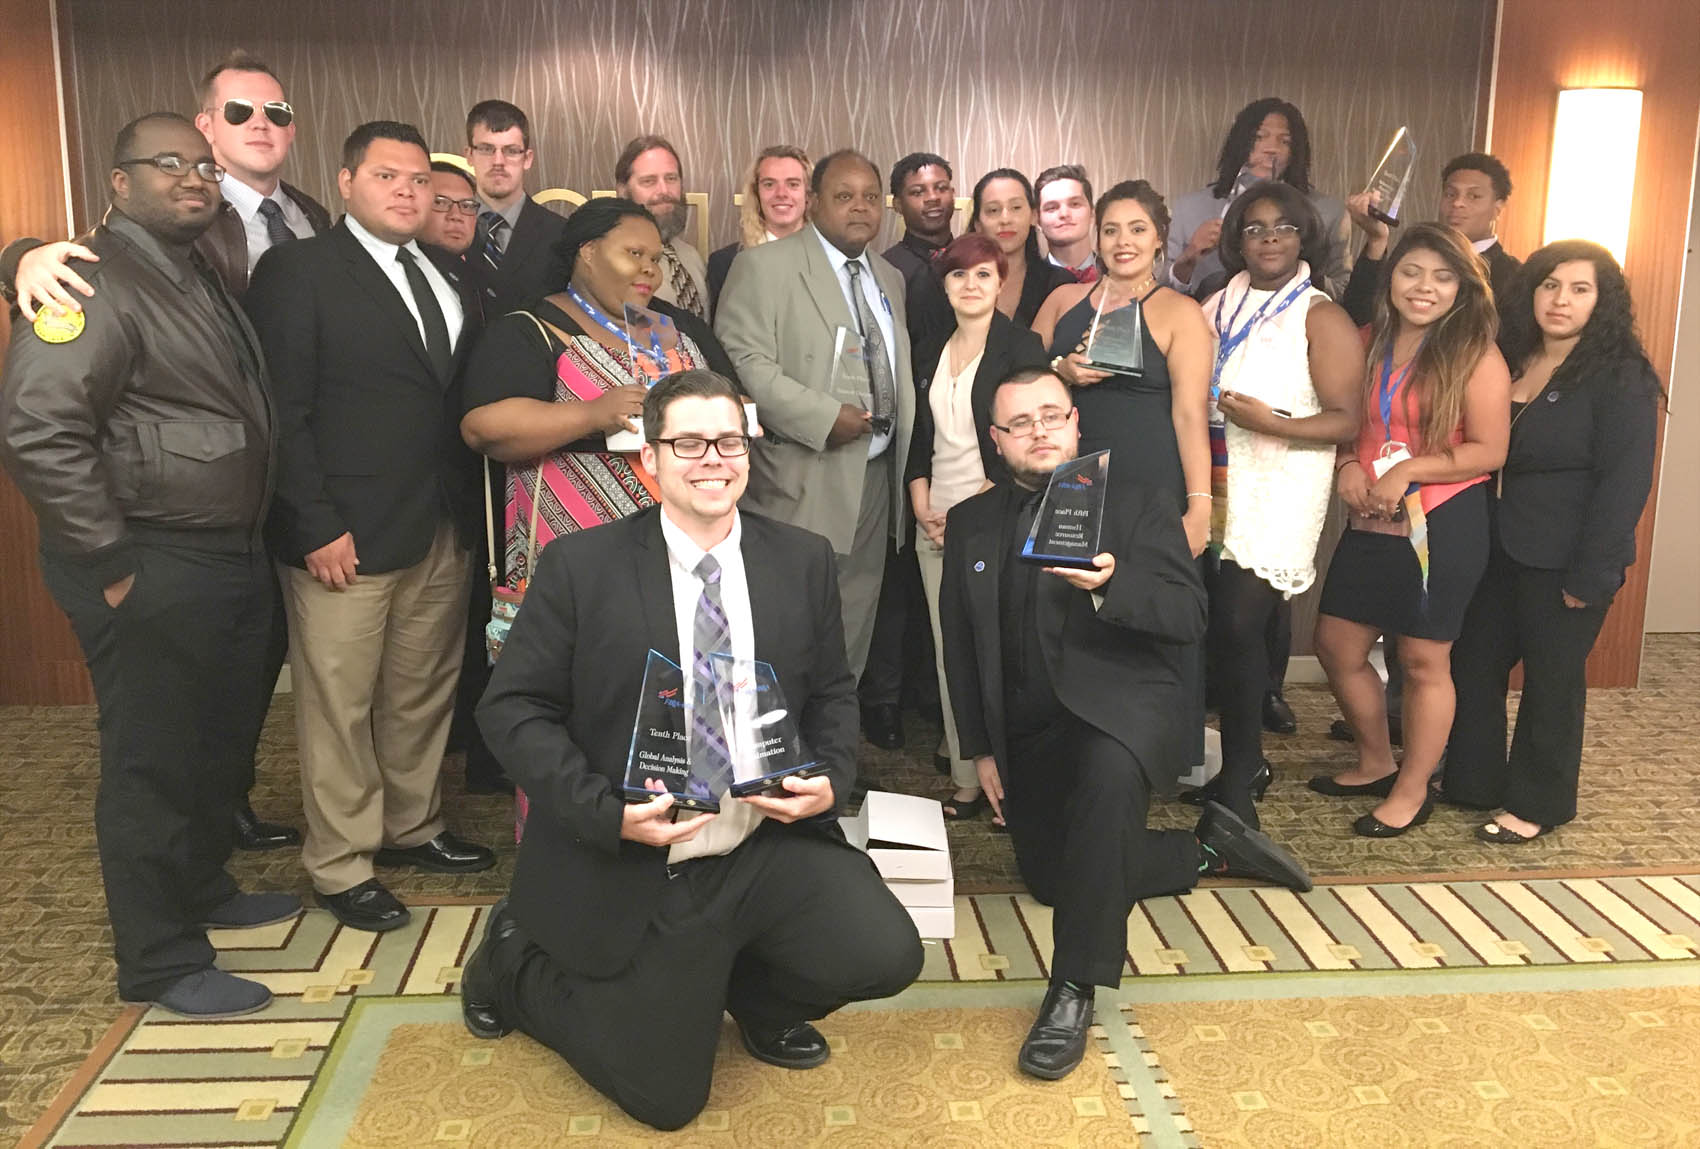 CCCC's Phi Beta Lambda students do well at national leadership conference